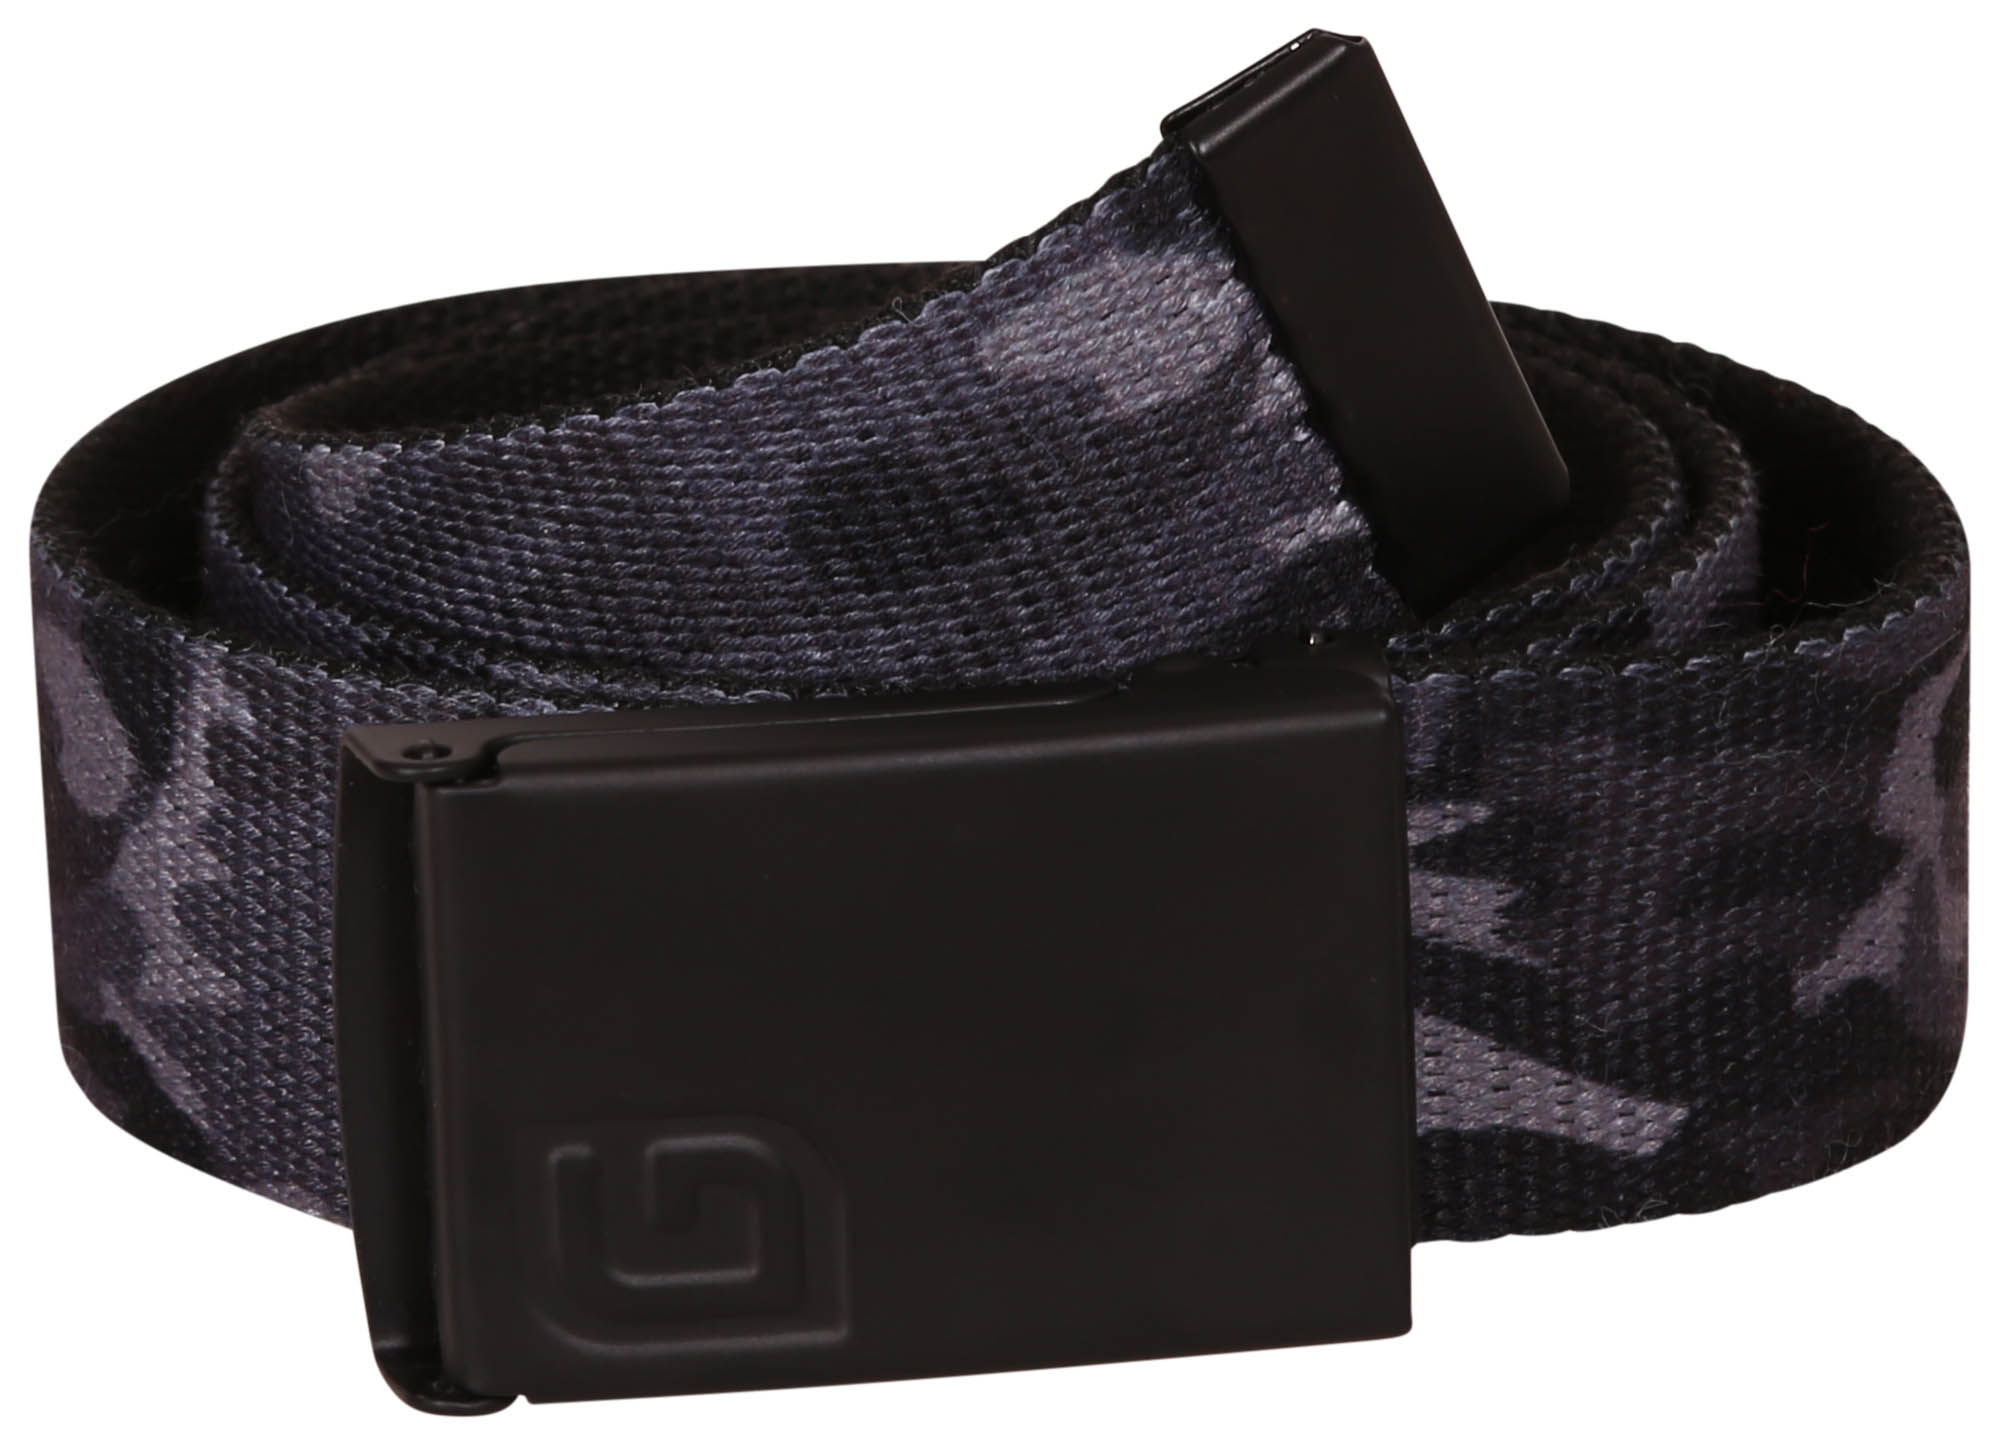 Kids’ fabric belt with a metal buckle